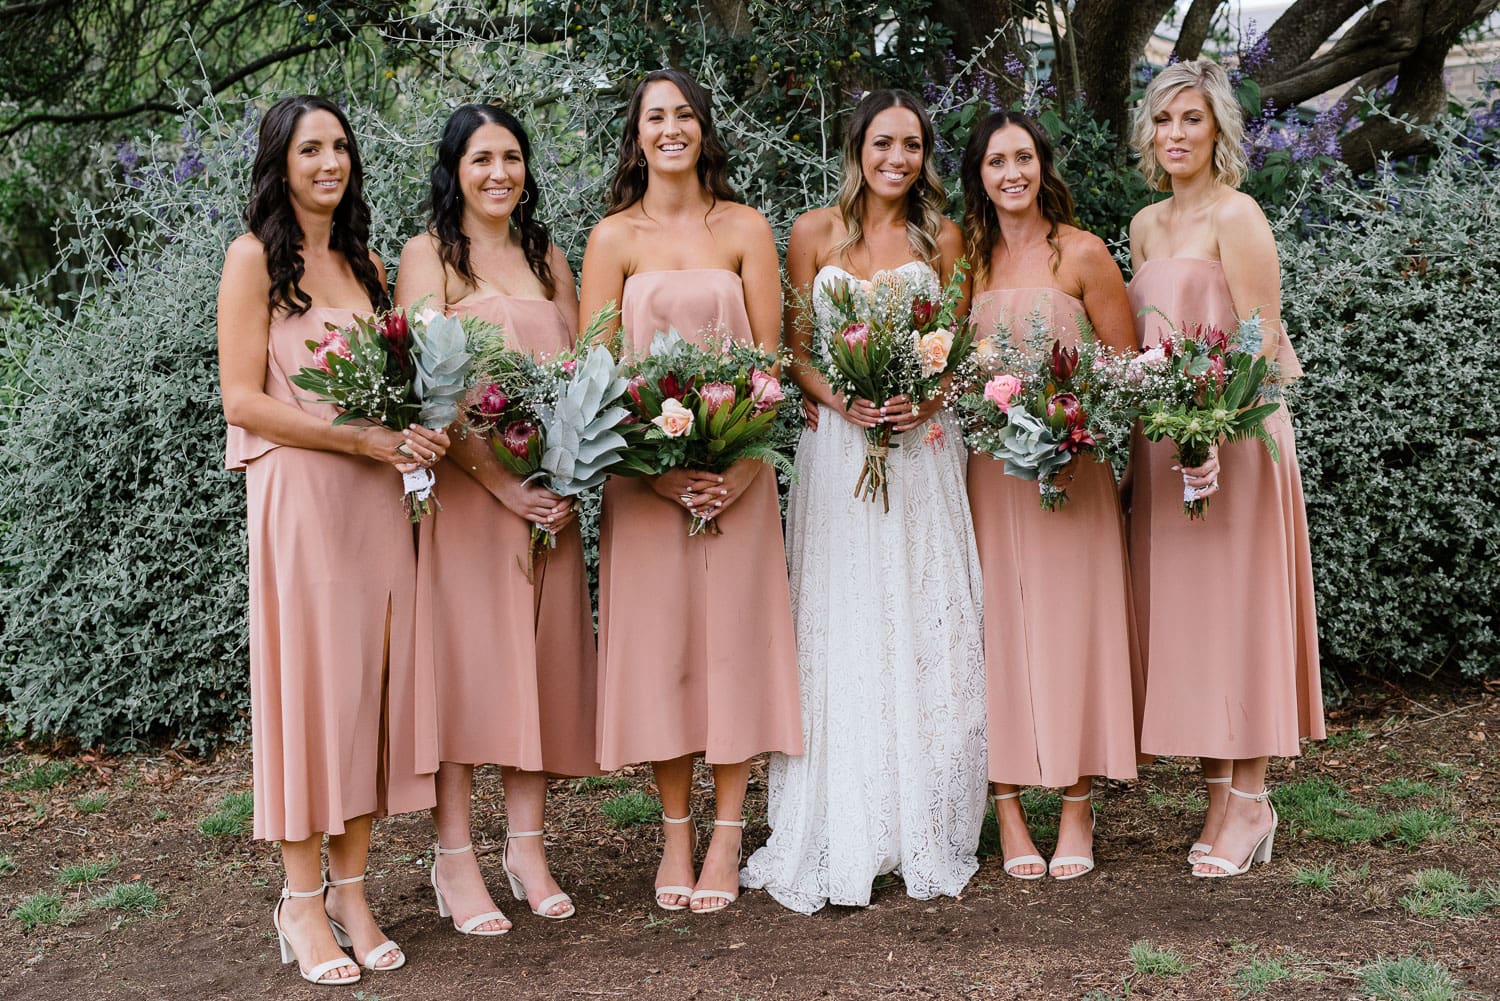 Bride and bridesmaids in pink dresses